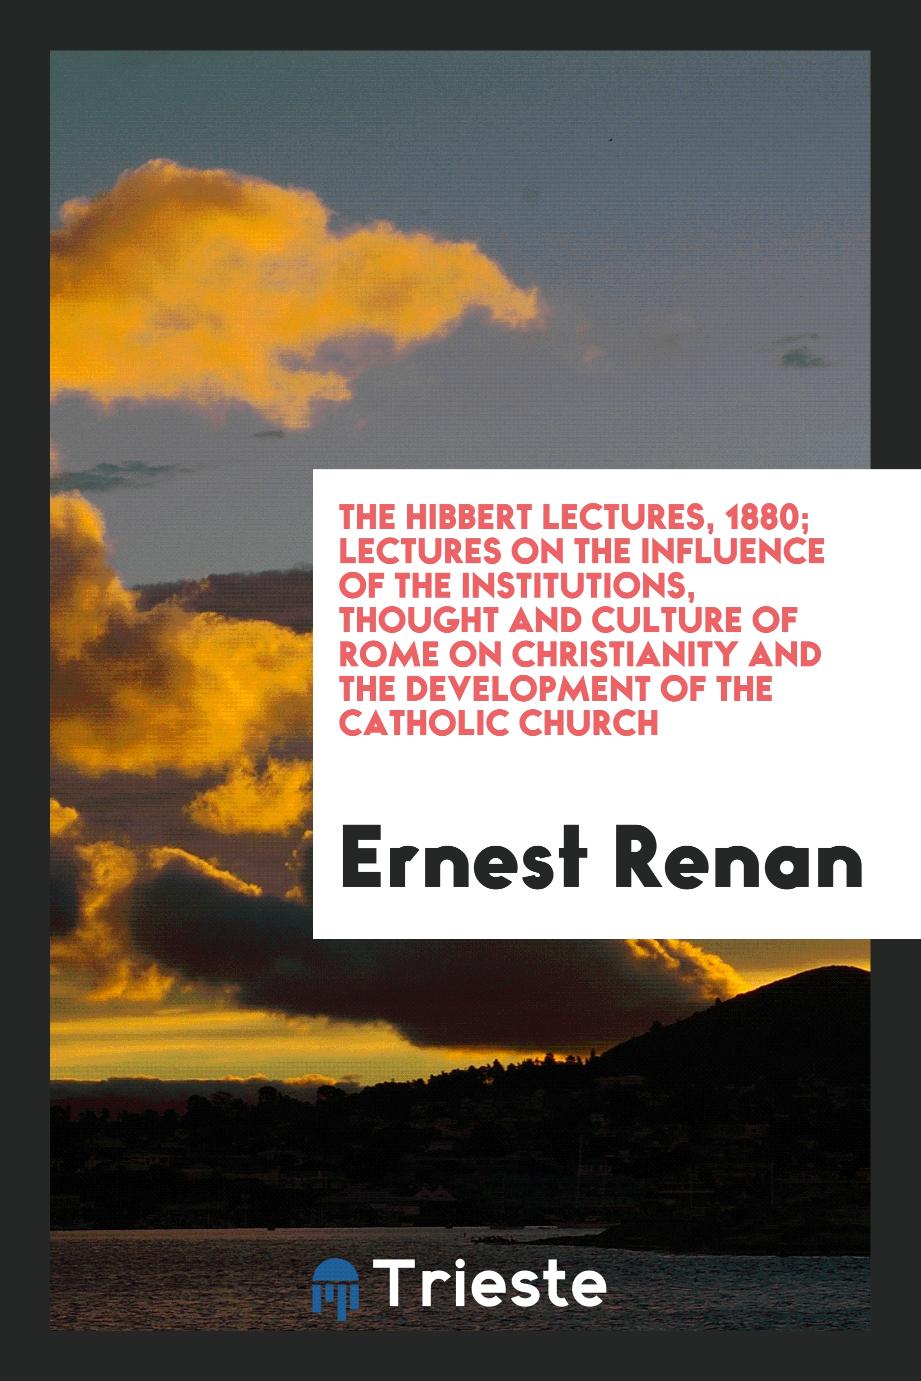 The Hibbert Lectures, 1880; Lectures on the influence of the institutions, thought and culture of Rome on Christianity and the development of the Catholic Church